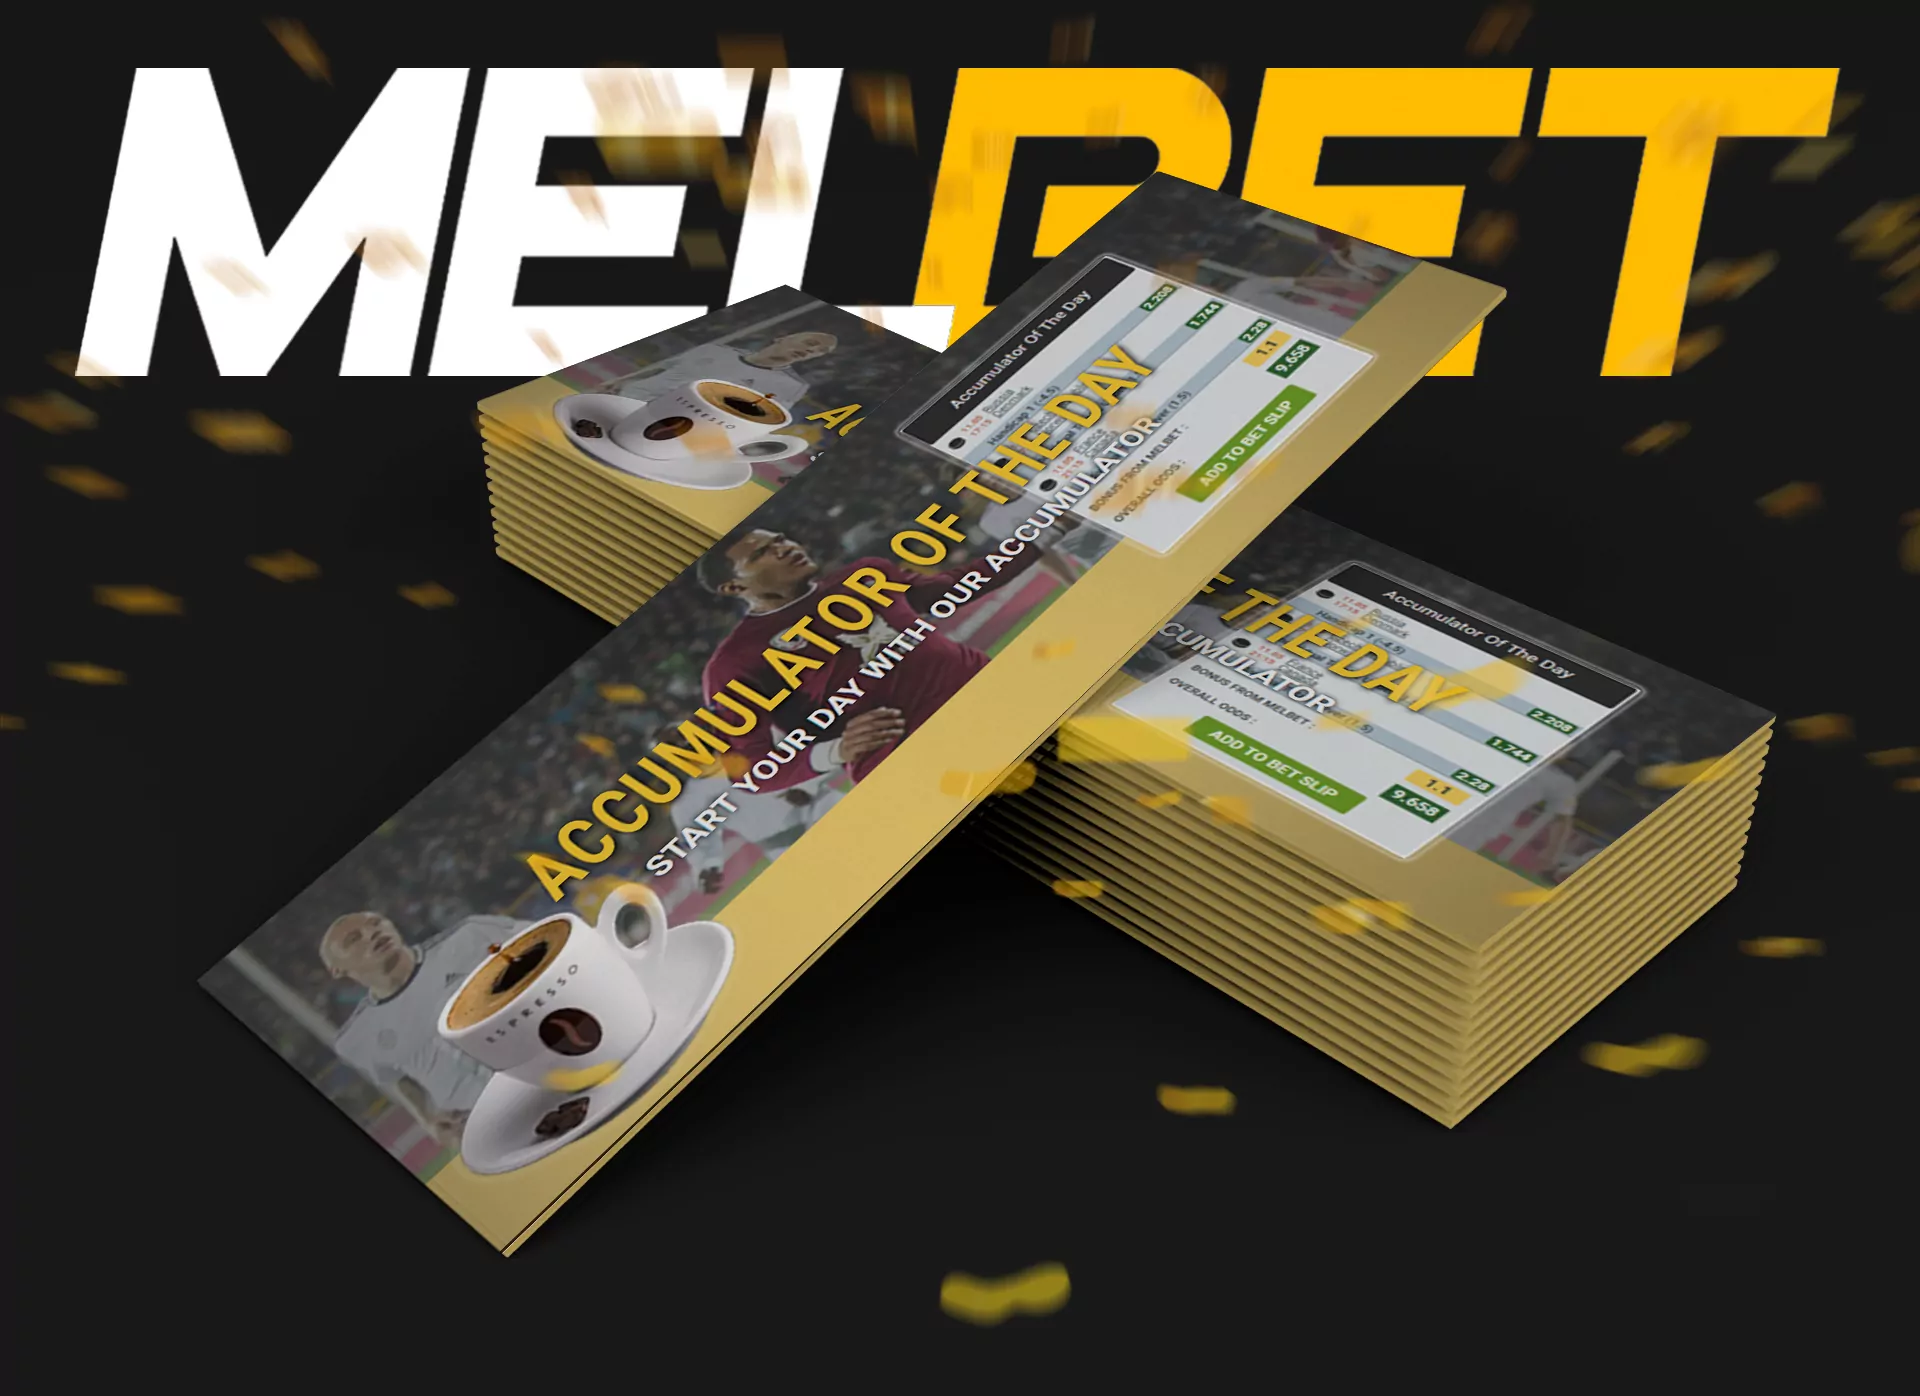 Get the Accumulator bonus from Melbet and increase your overall odds by up to 10%.